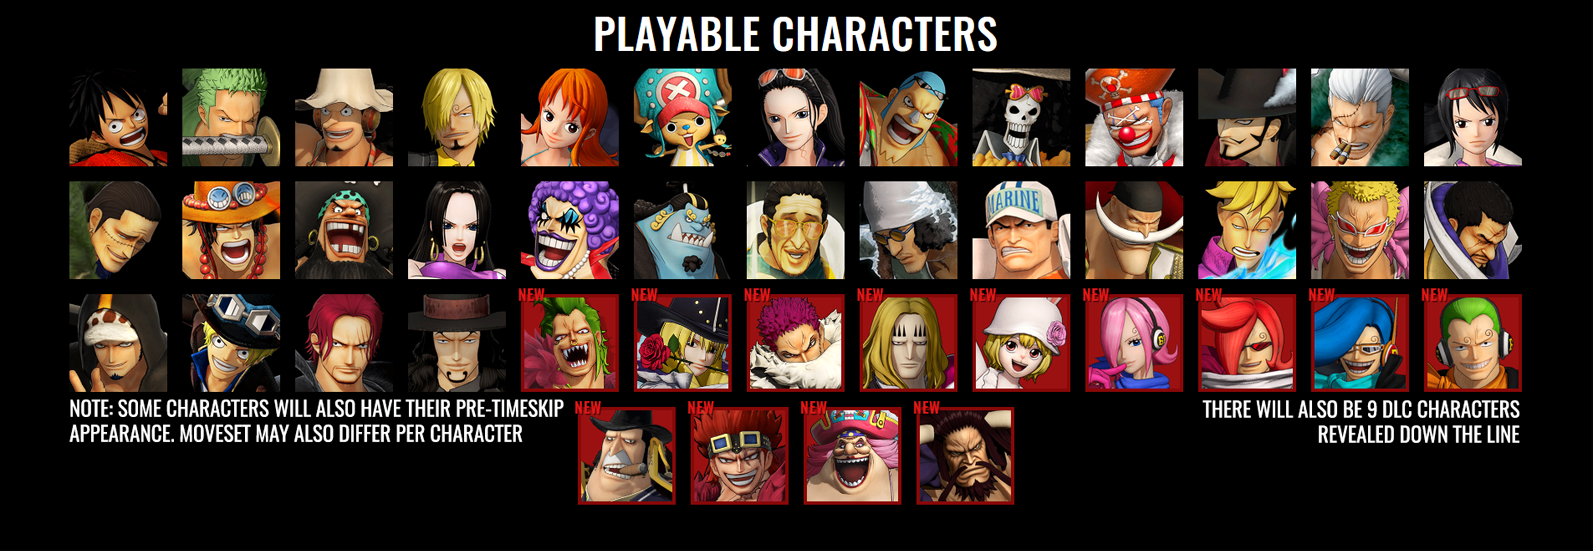 playable-characters4oqjx6.png